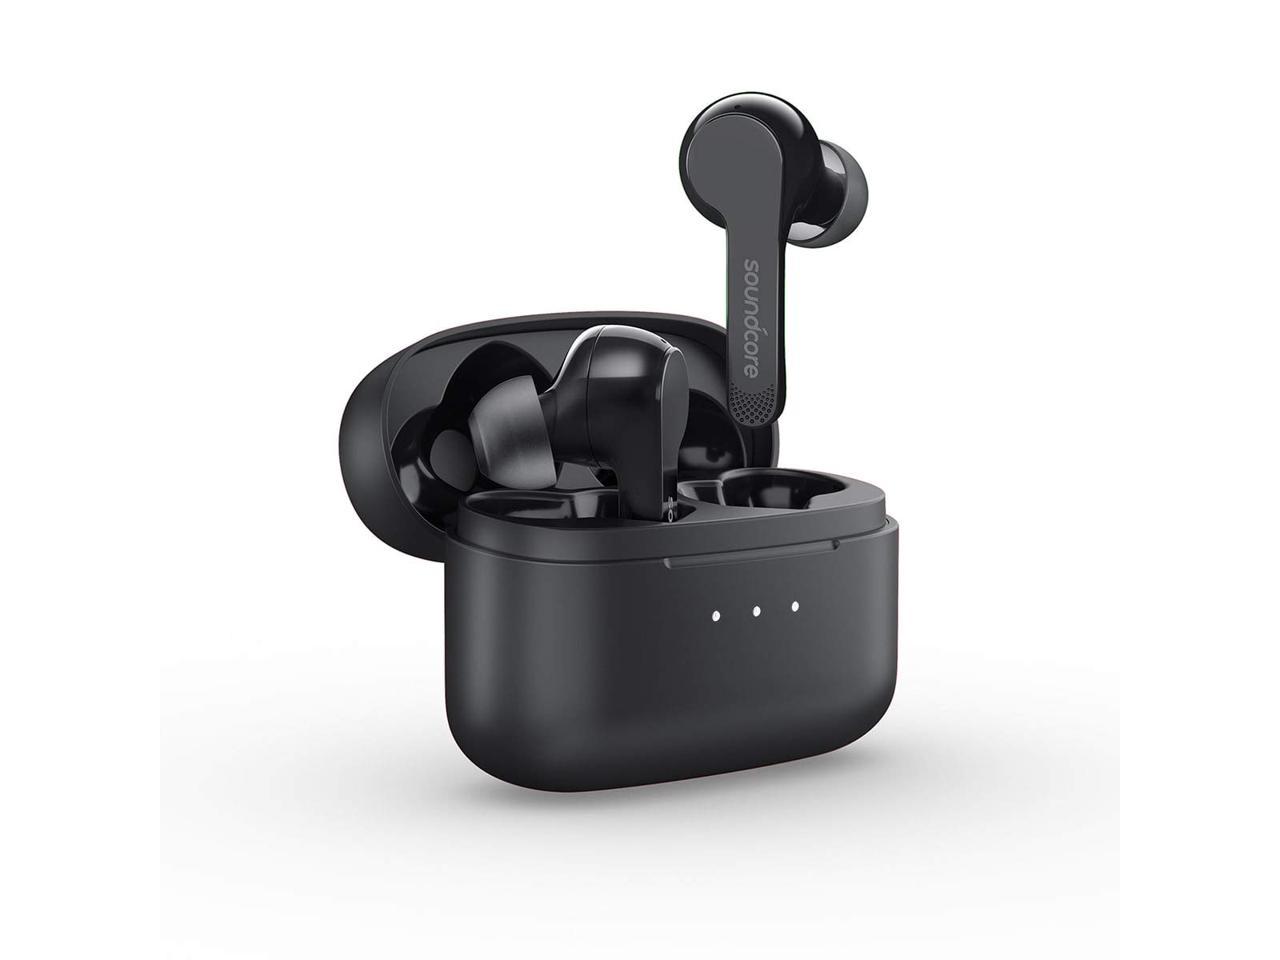 Soundcore Anker Liberty Air True-Wireless Earphones with Charging Case (Black) $19.99 + FS